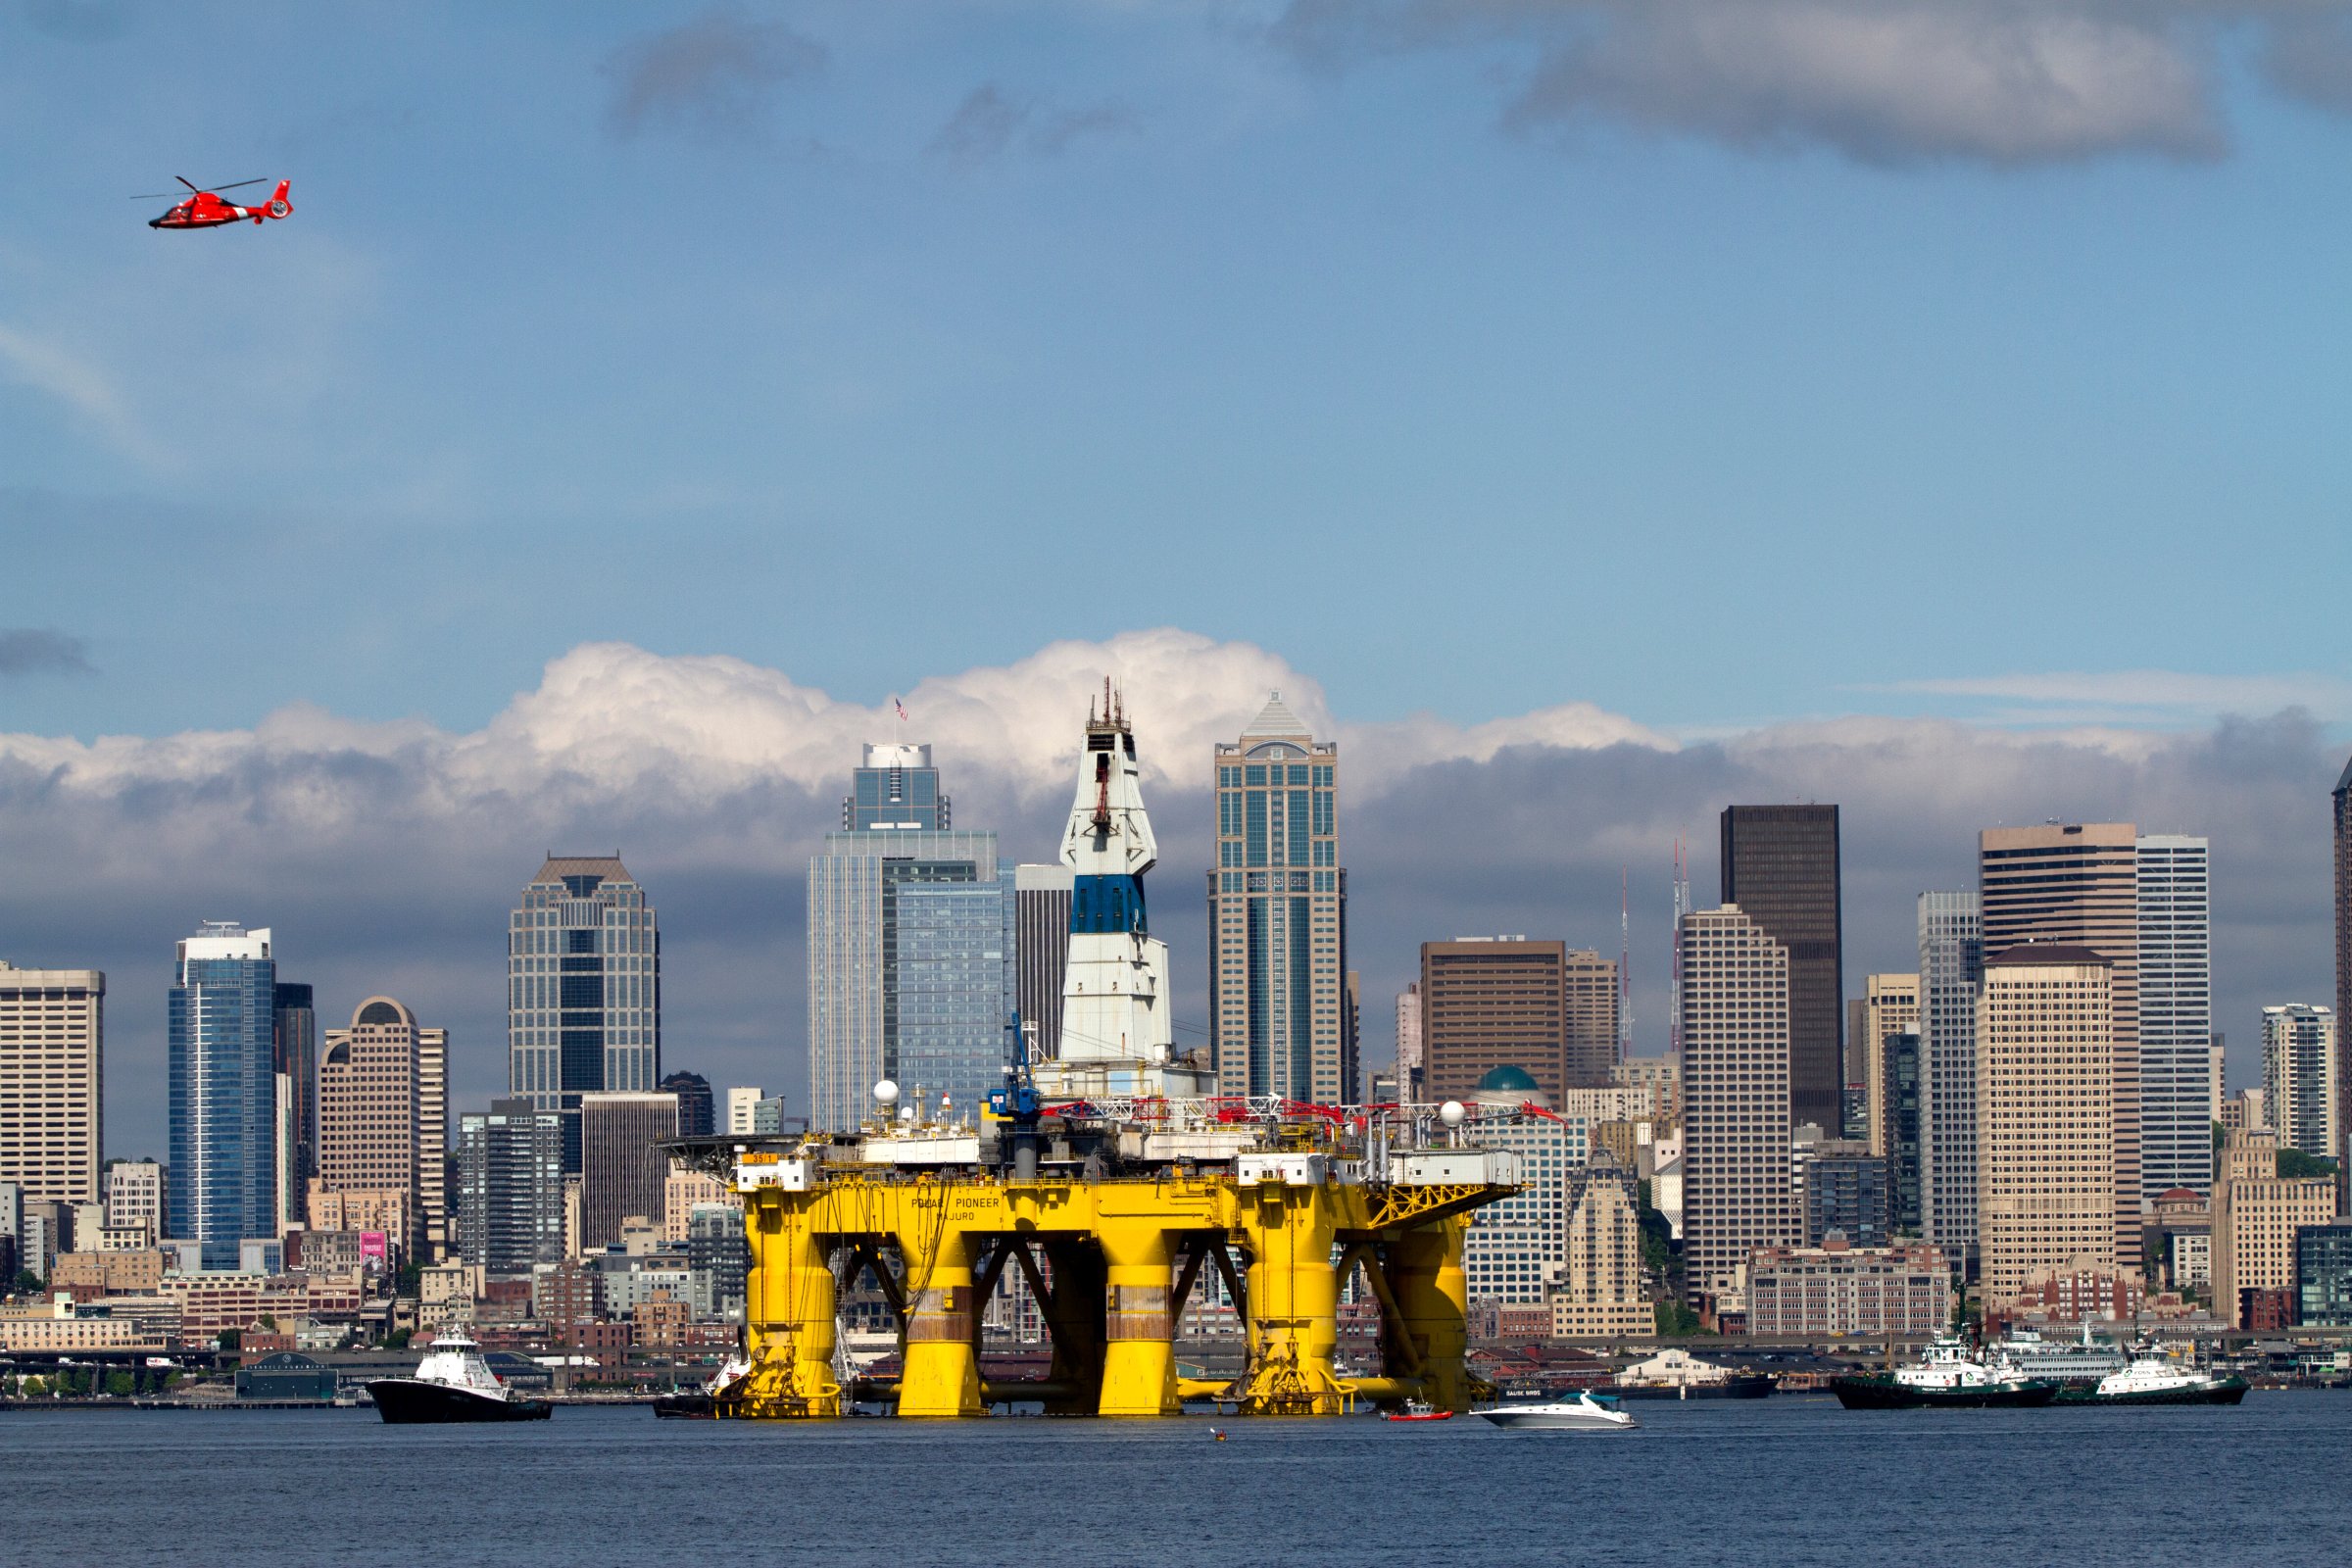 Large Shell Oil Ship Arrives In Seattle, As Part Of Fleet To Lead Company's Oil Exploration Off Alaskan Coast